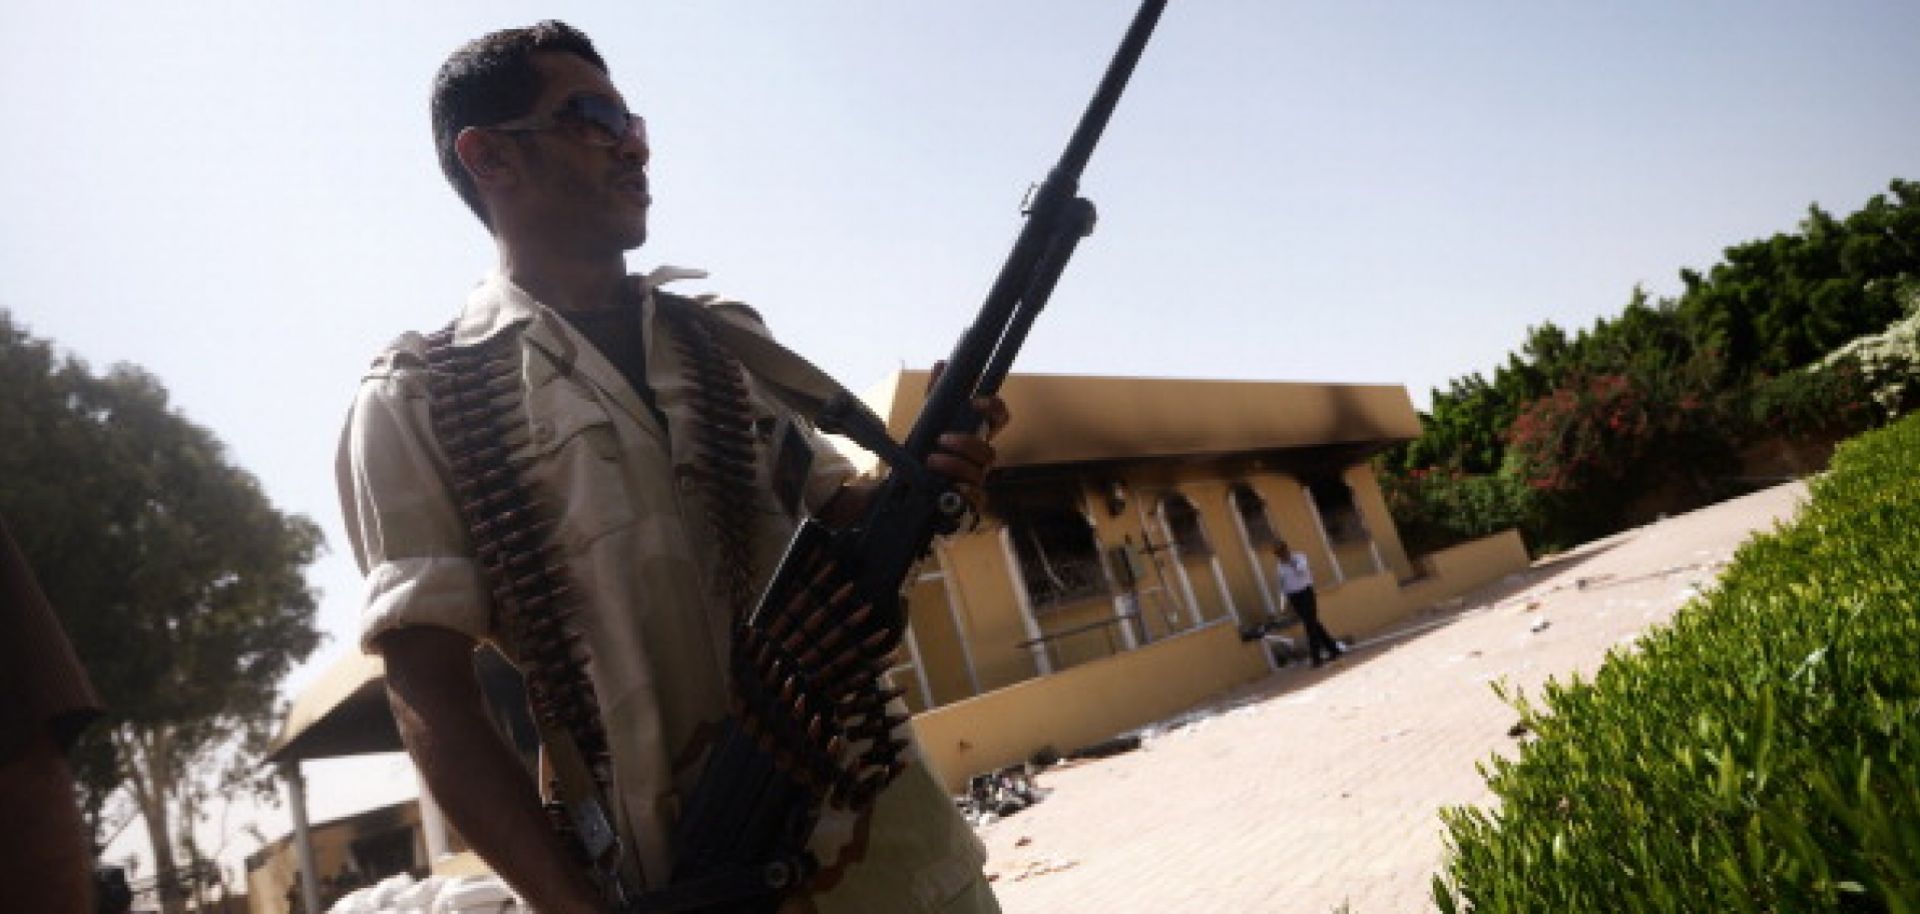 A member of the Libyan security forces patrols the area outside the U.S. consulate in Benghazi two days after suspected Islamic militants fired on the compound on December 12, 2012, killing U.S. ambassador Chris Stevens. 